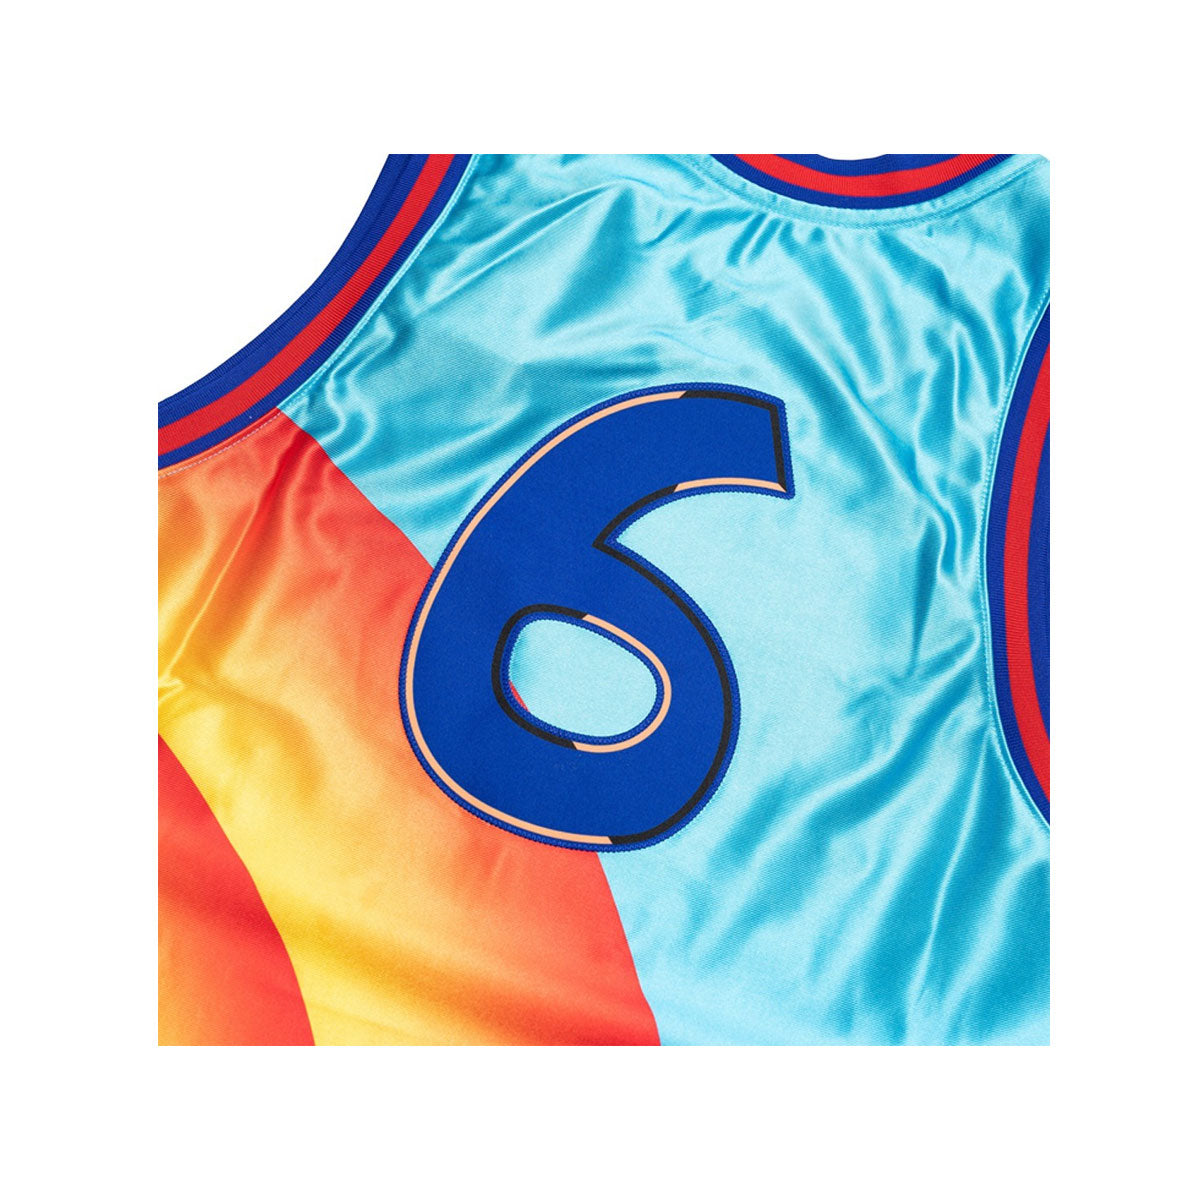 Nike LeBron x Space Jam A New Legacy "Tune Squad" Jersey - KickzStore